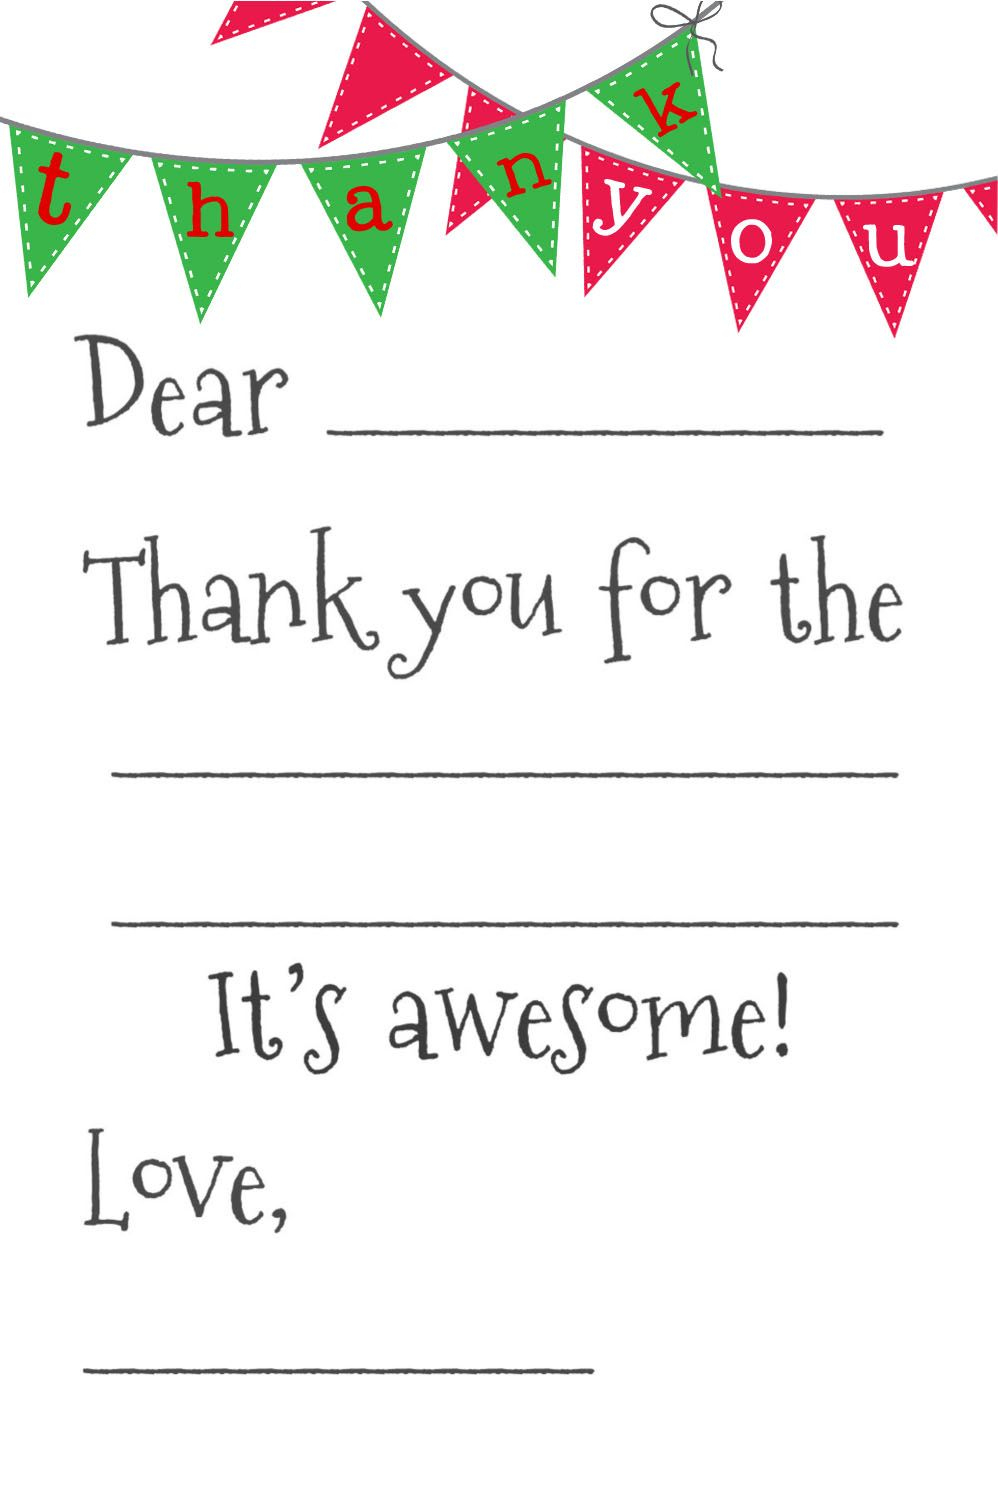 Free Fill-In-The-Blank Thank-You Cards | Printables | Pinterest - Fill In The Blank Thank You Cards Printable Free